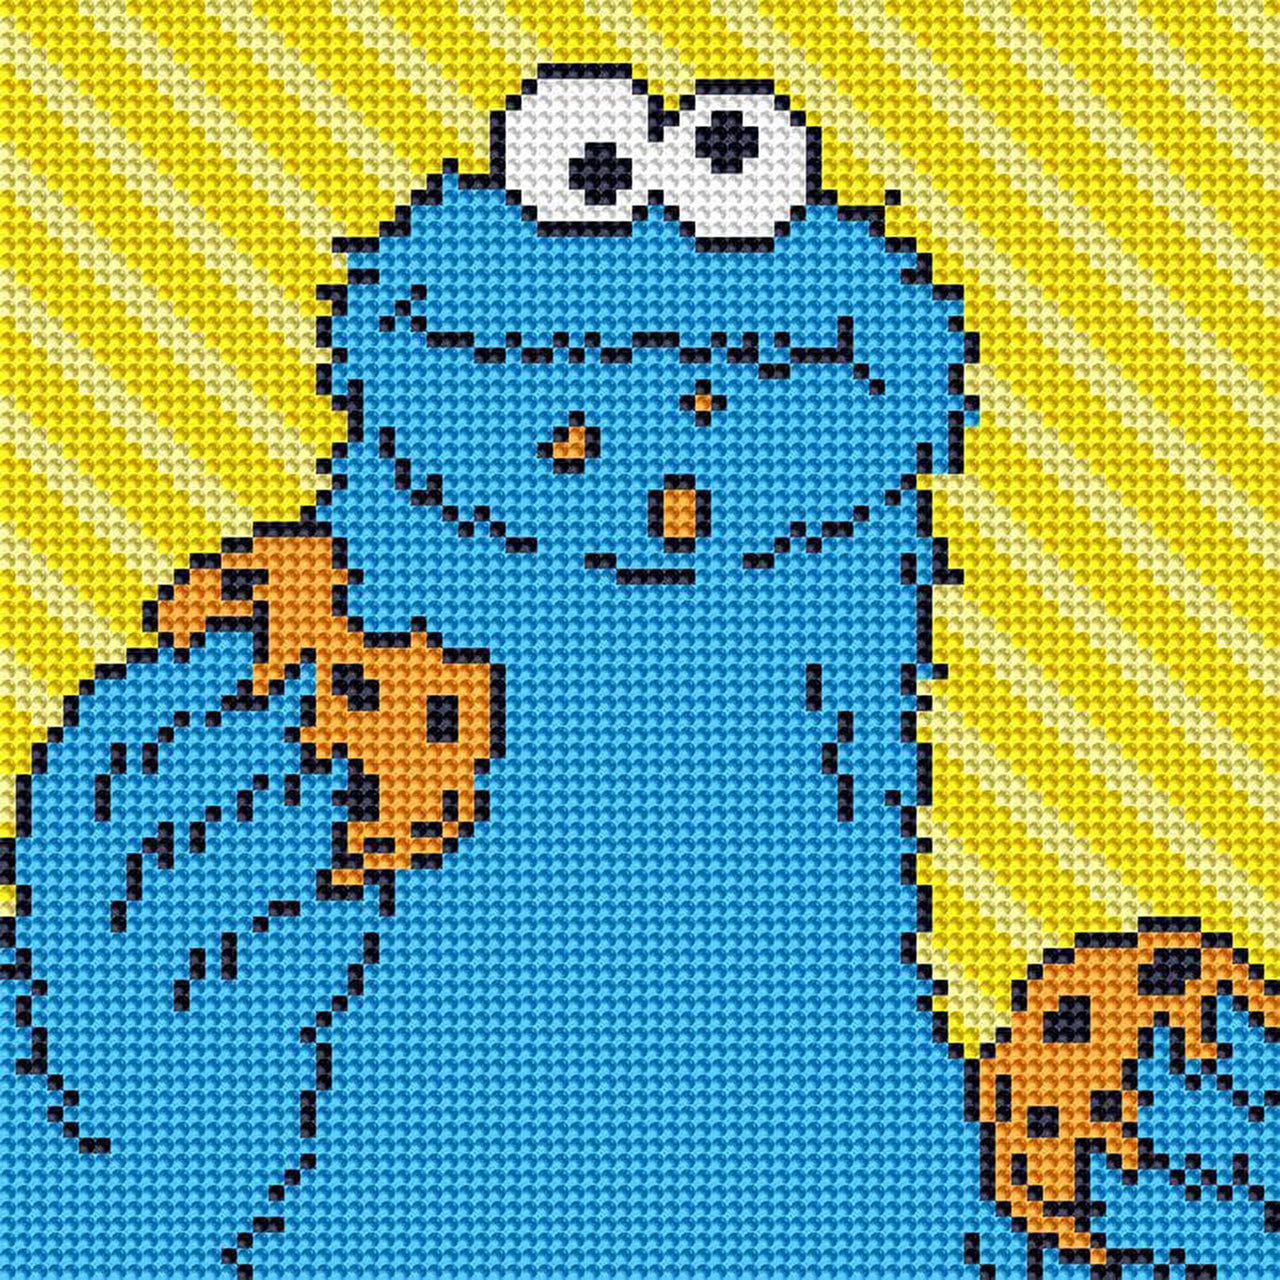 Diamond Painting Cookie Monster™ Portrait 9" x 9" (23cm x 23cm) / Round with 6 Colors including 1 AB / 6,561